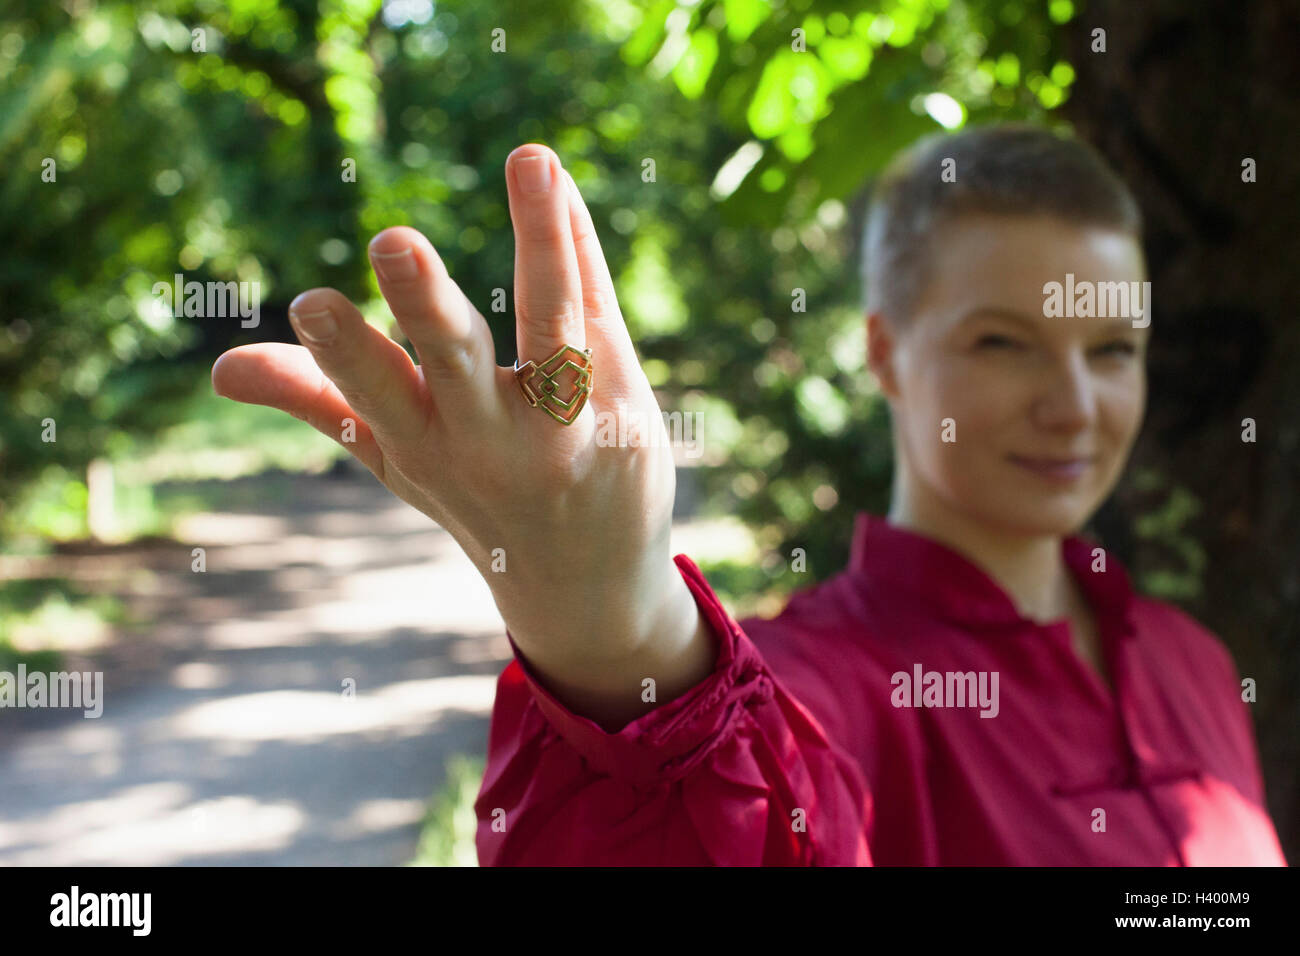 Woman wearing ring gesturing while practicing Tai Chi at park Stock Photo